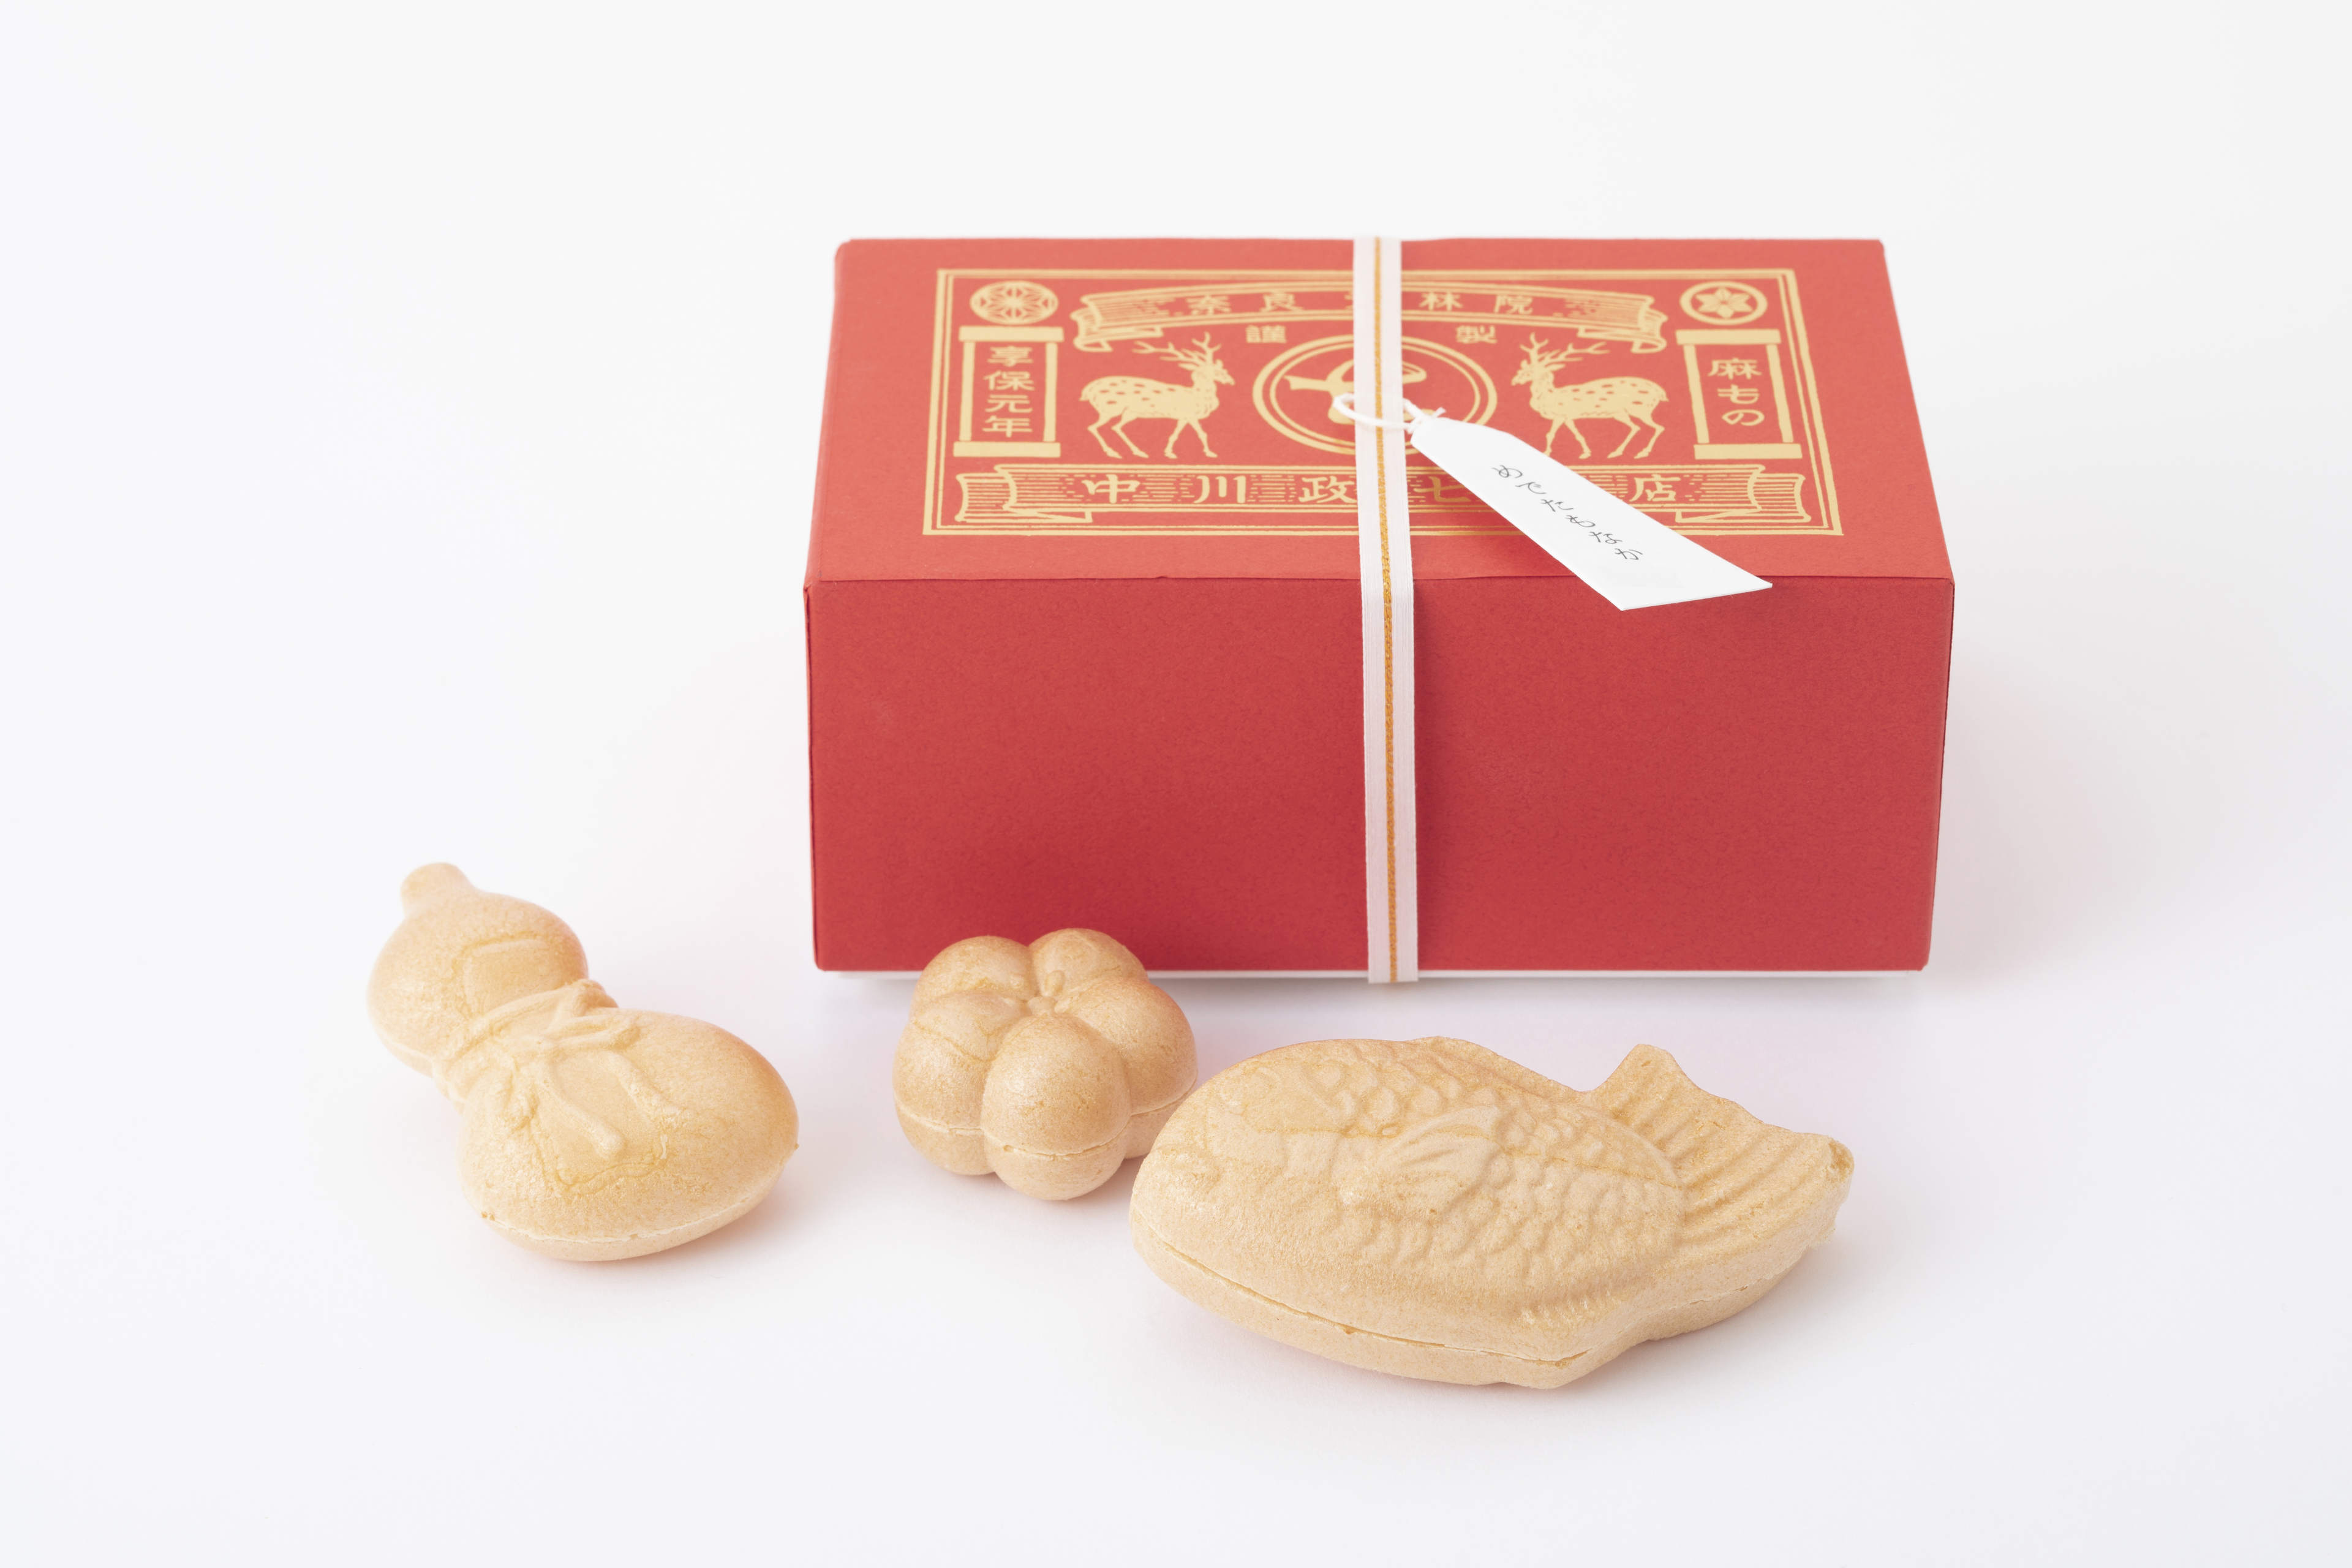 Photo of Medeta-monaka (good-luck Japanese sweets)'s recommended product